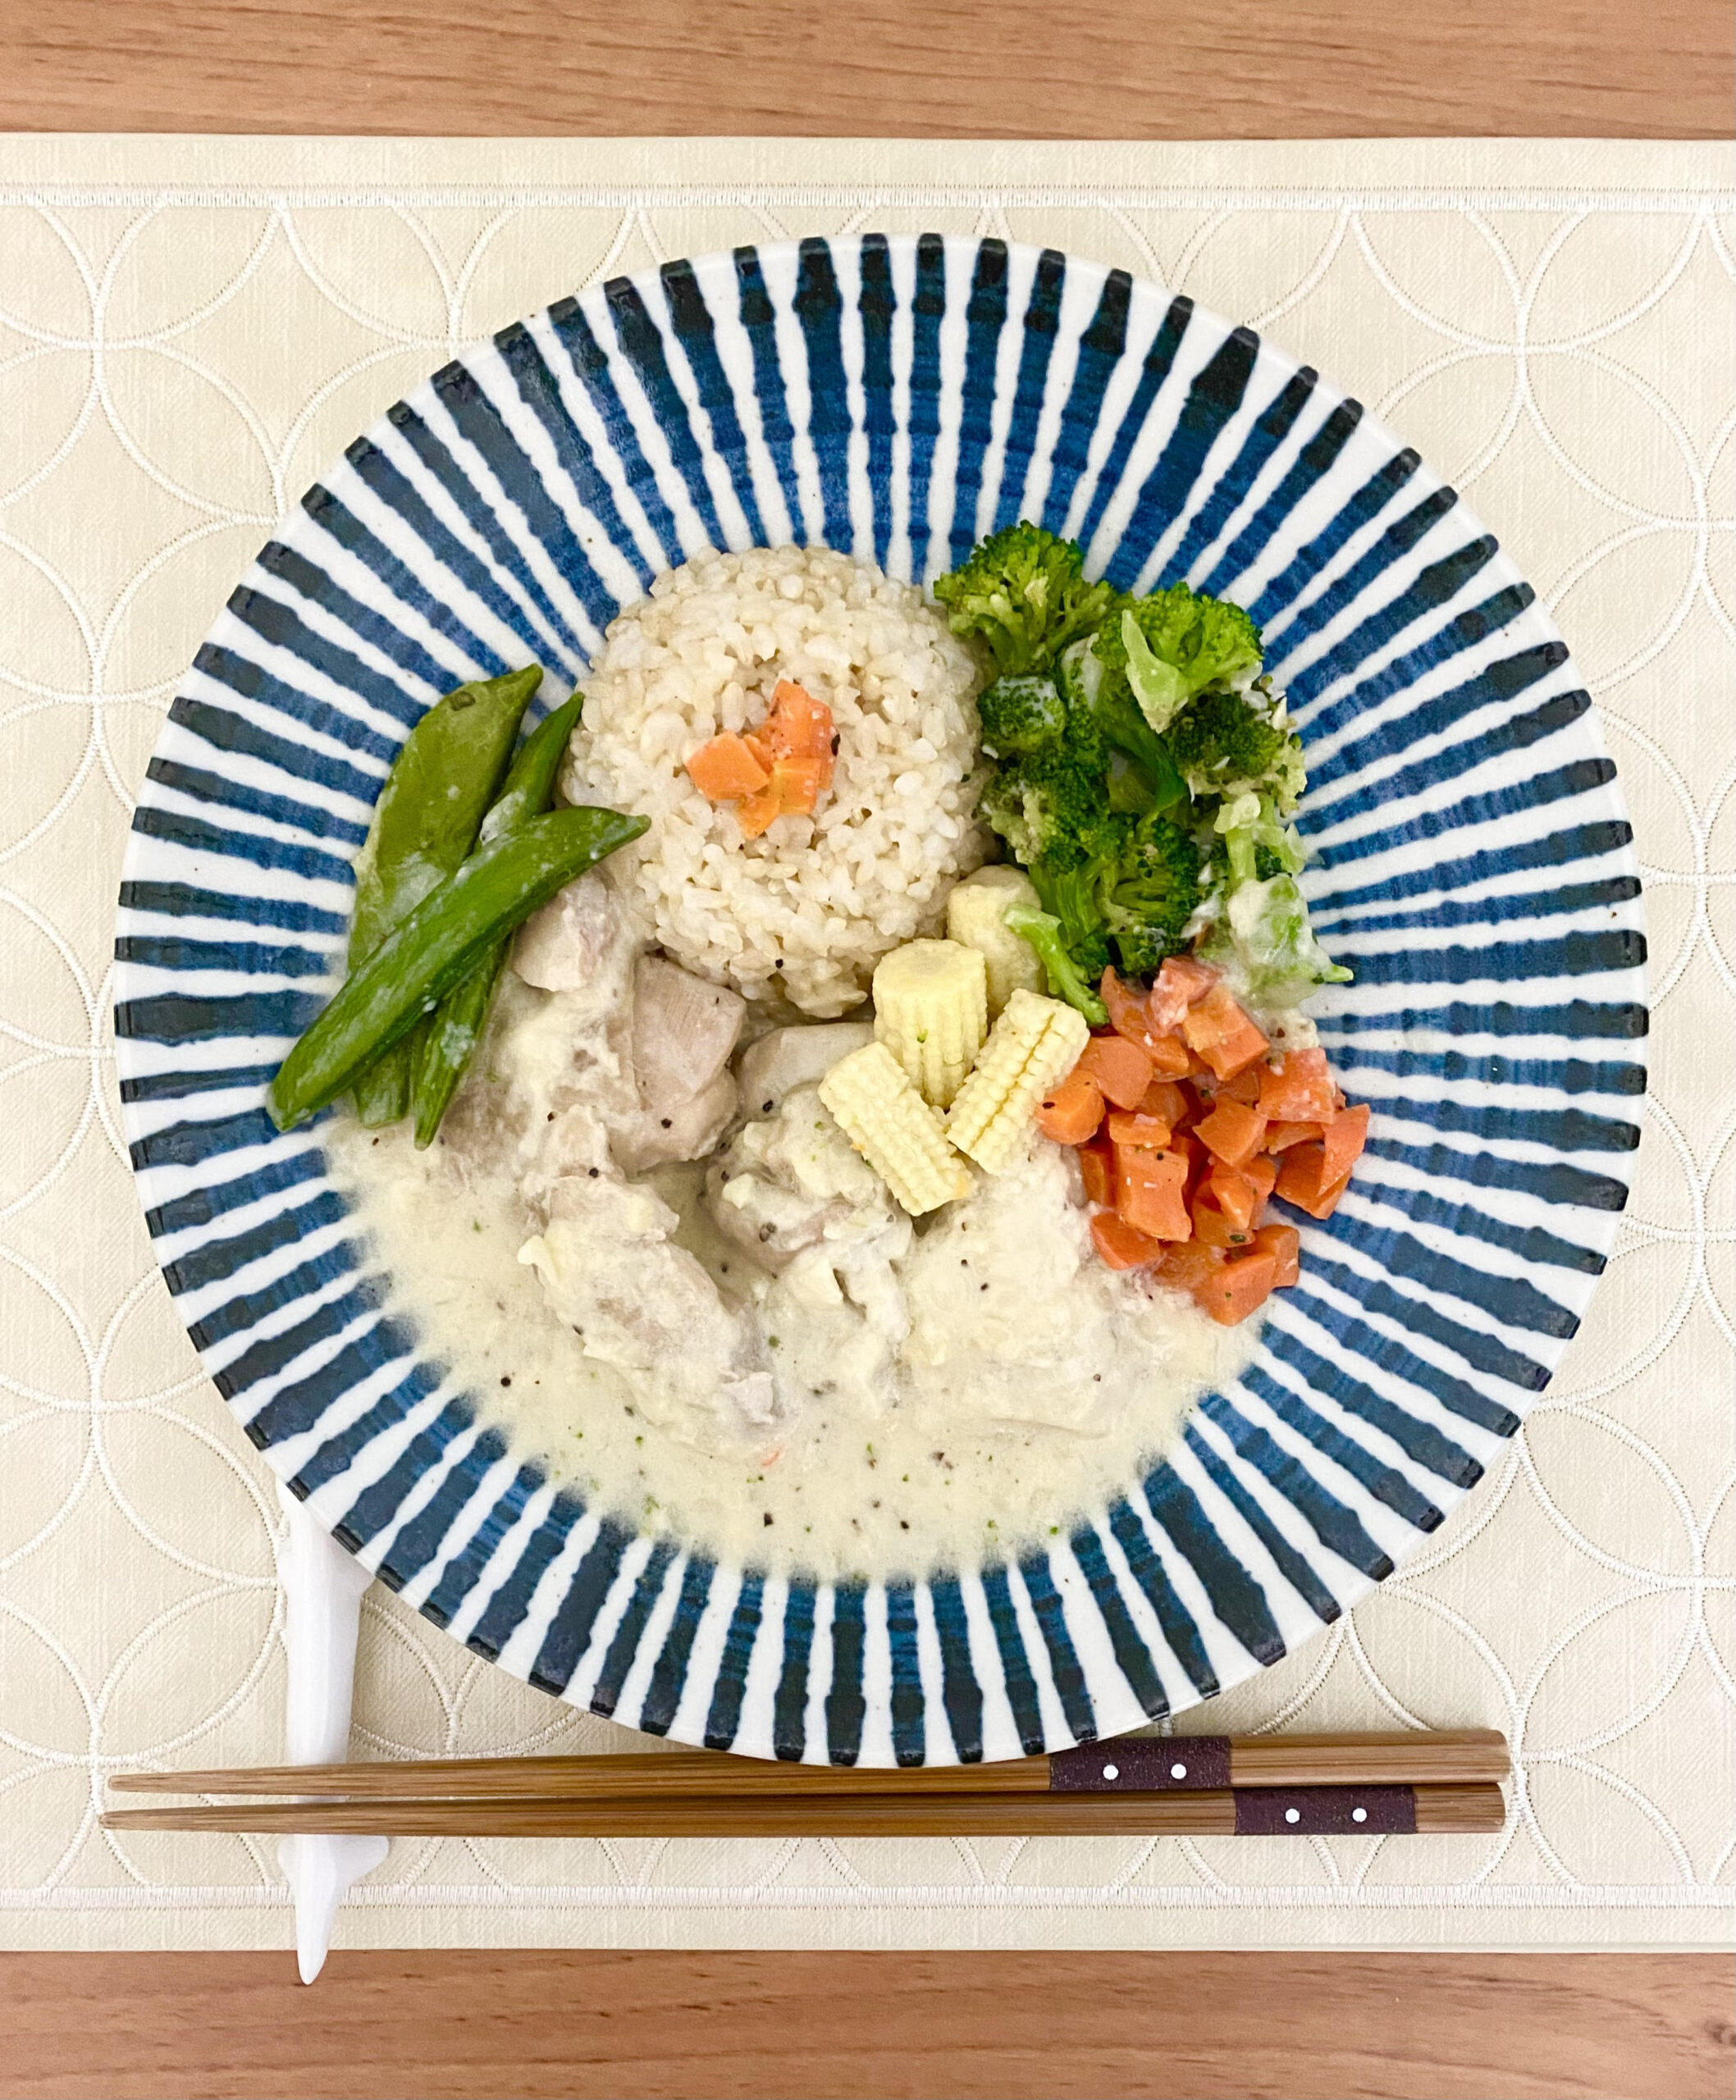 FIT FOOD HOME_低糖質VEGE＋_スパイシーガーリッククリームのローストチキン+玄米_盛り付け後